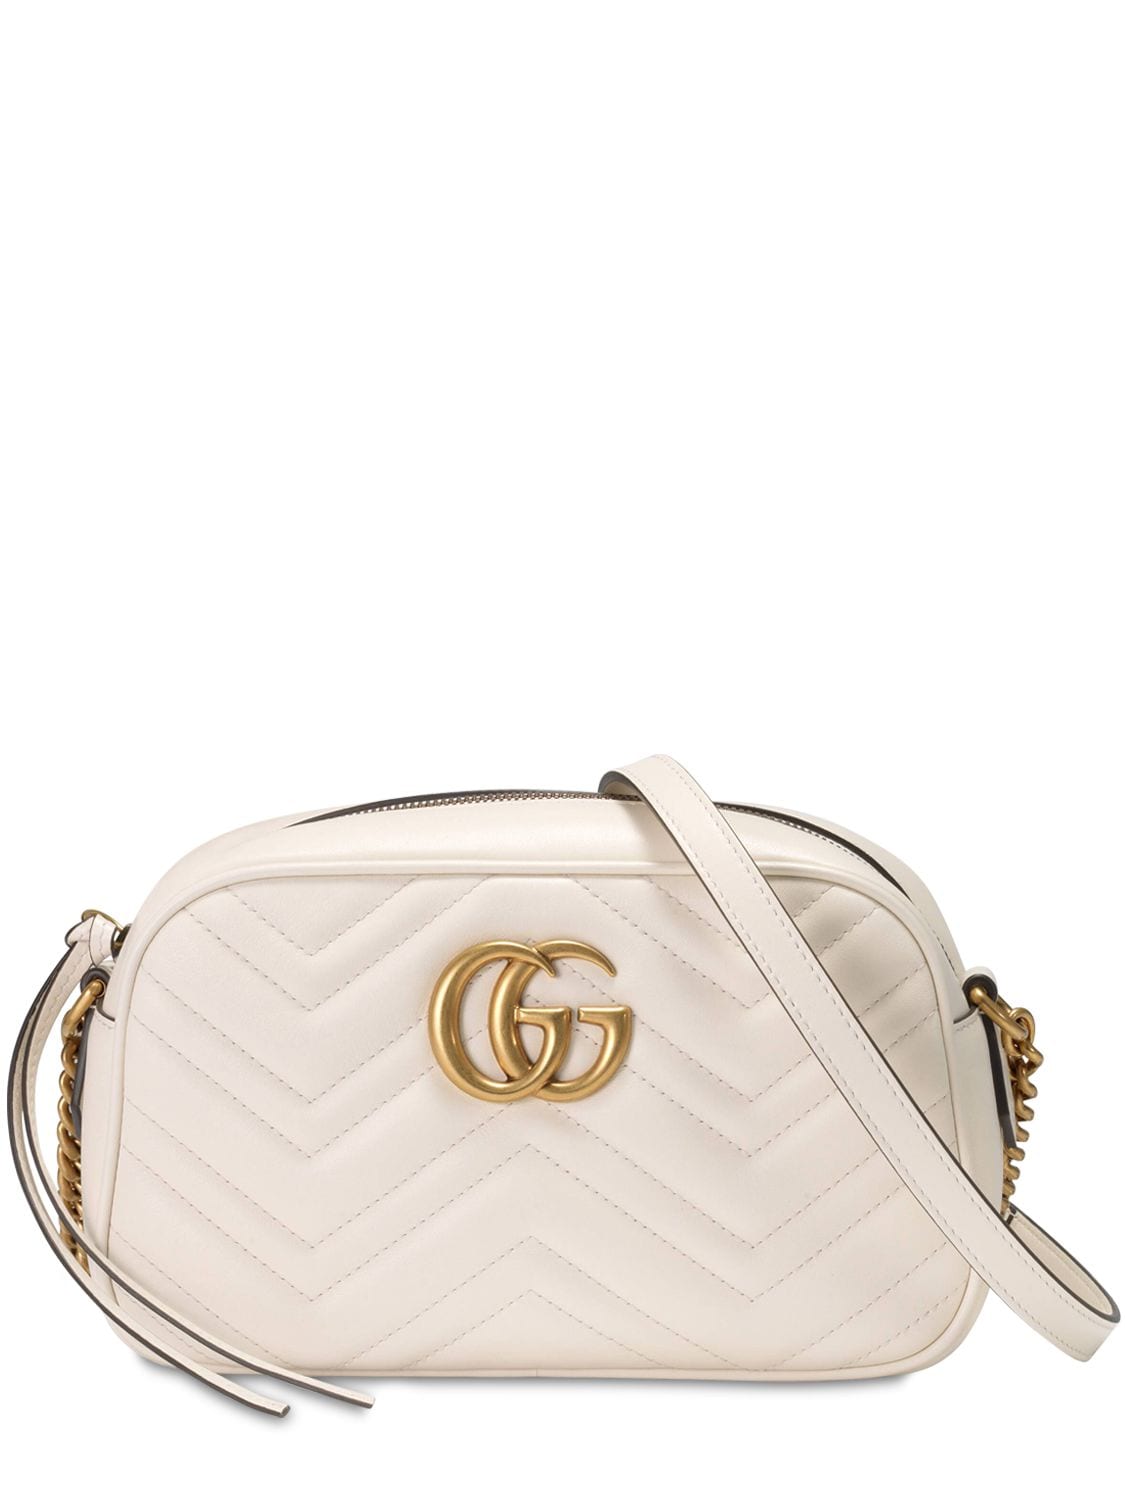 Shop Gucci Gg Marmont Leather Camera Bag In Mystic White